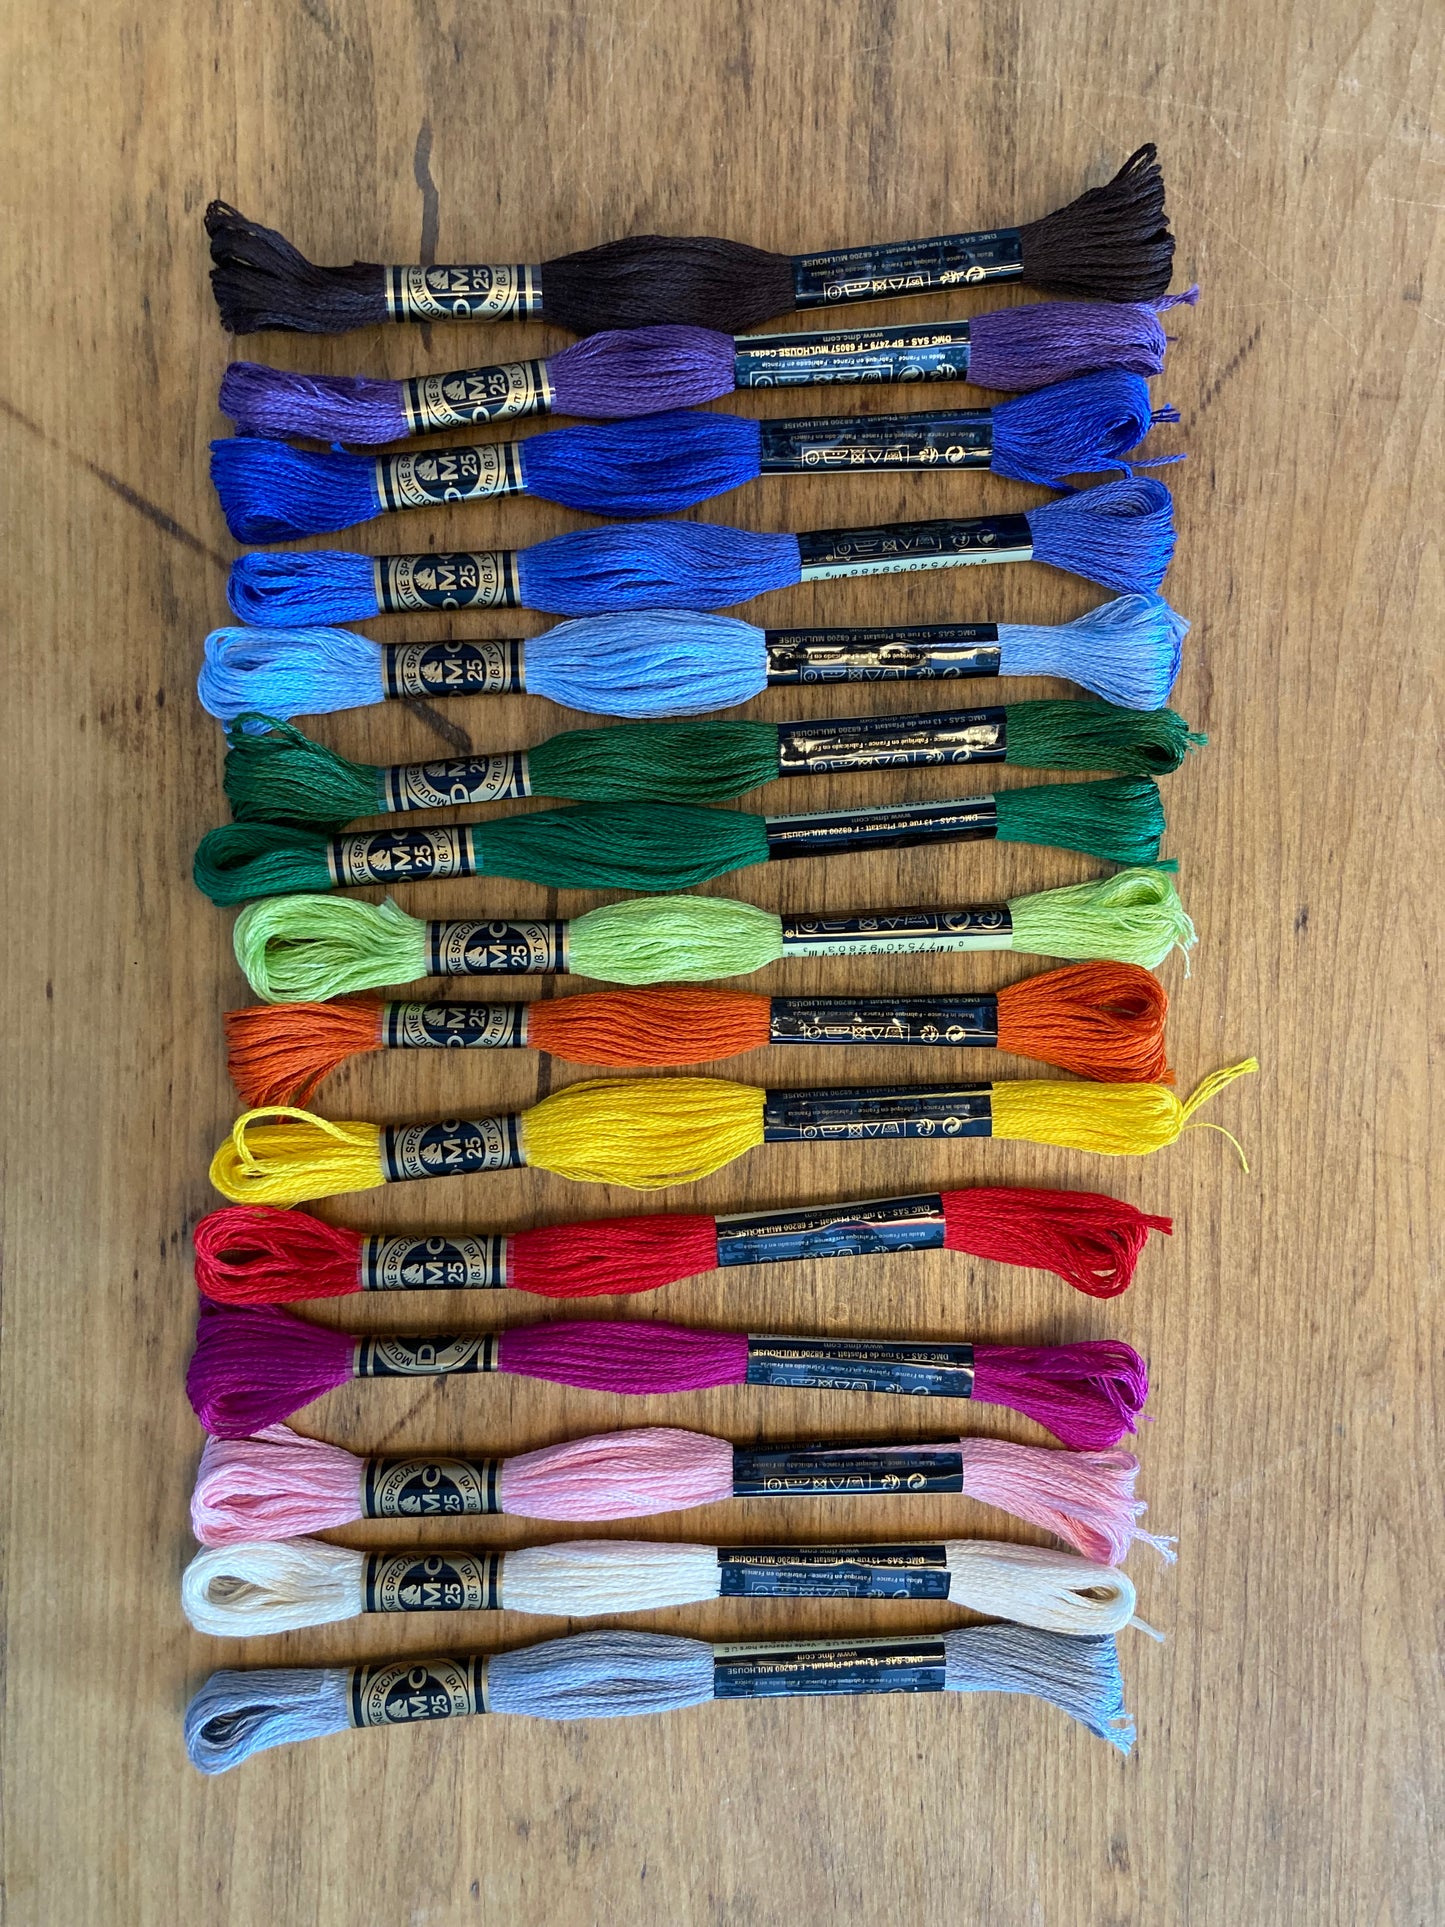 Crafting Supply - EMBROIDERY FLOSS, 16 colours!